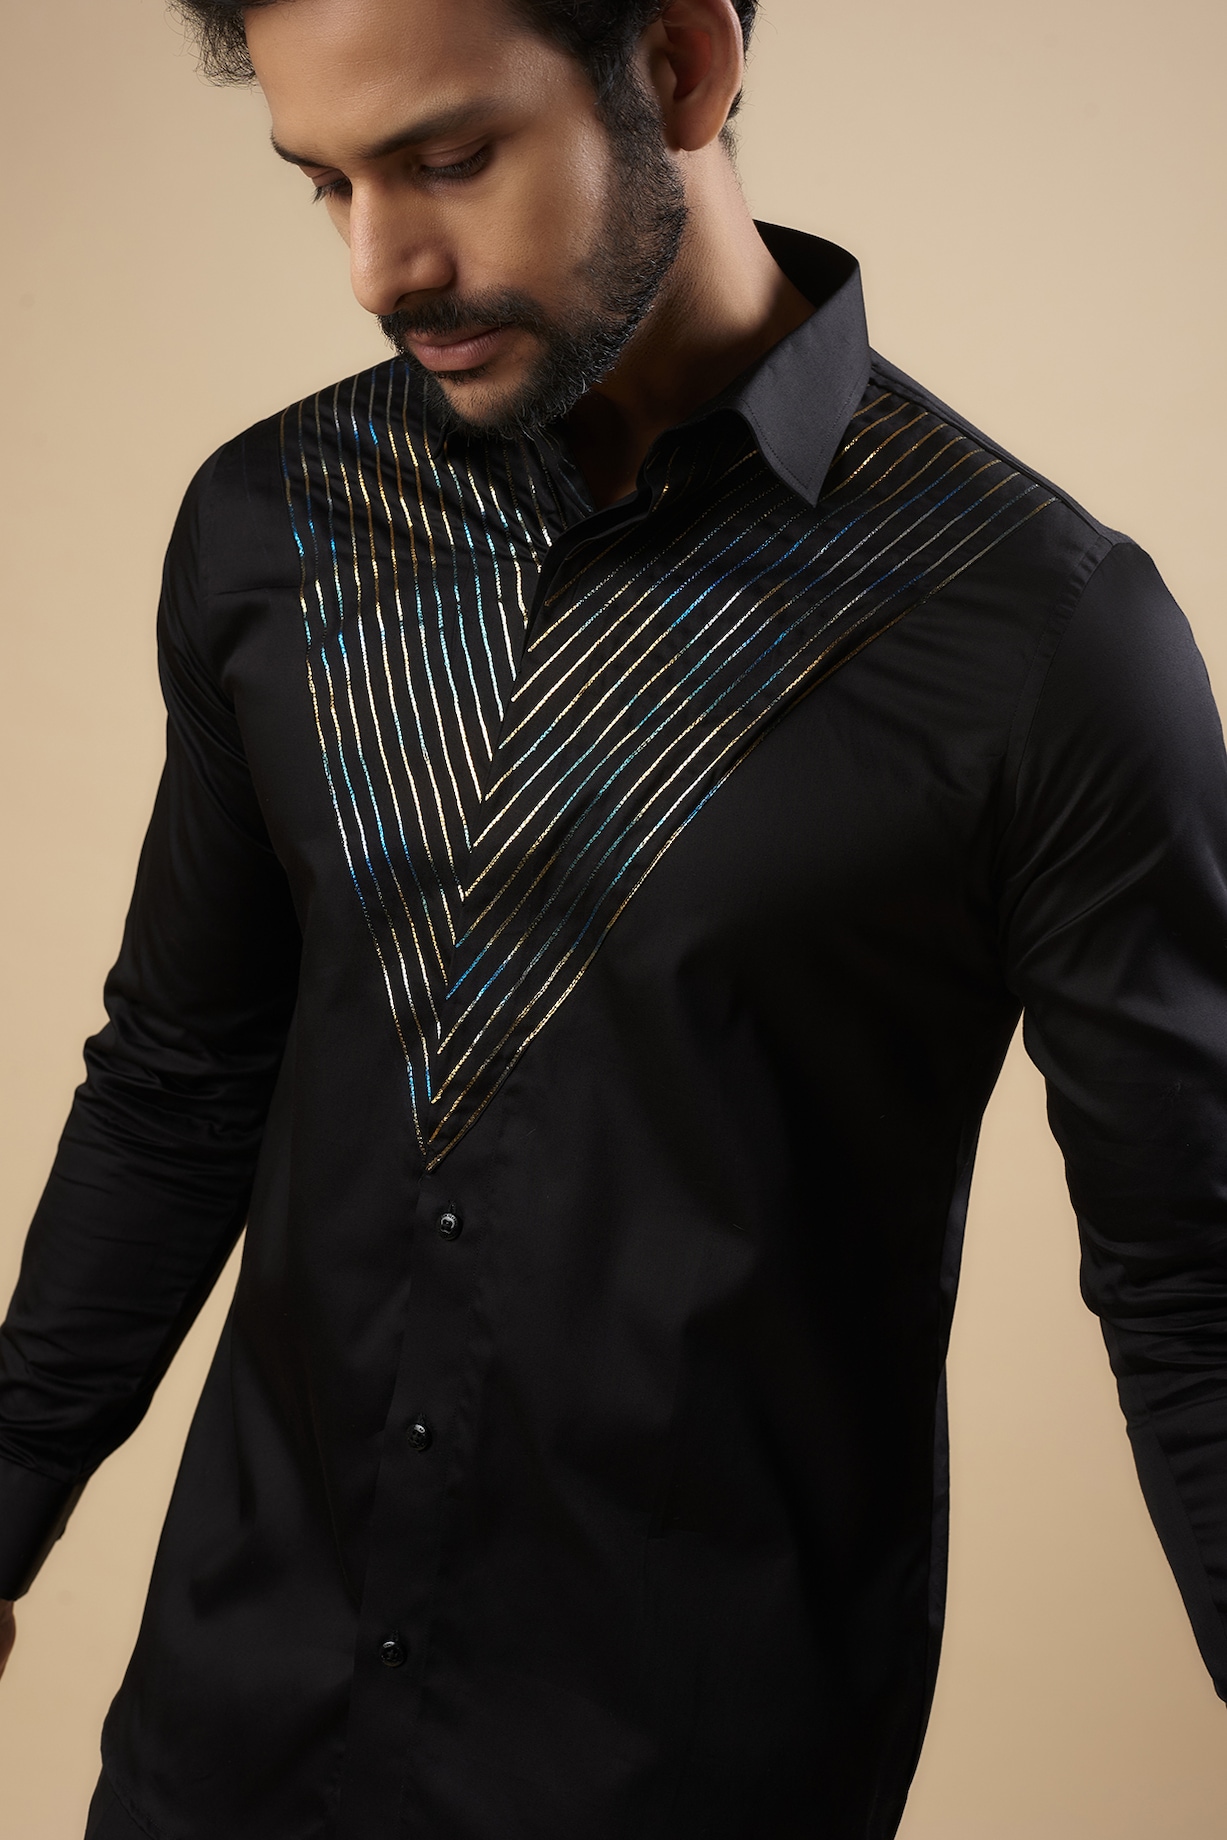 Black Cotton Thread Embroidered Shirt by Aces by Arjun Agarwal